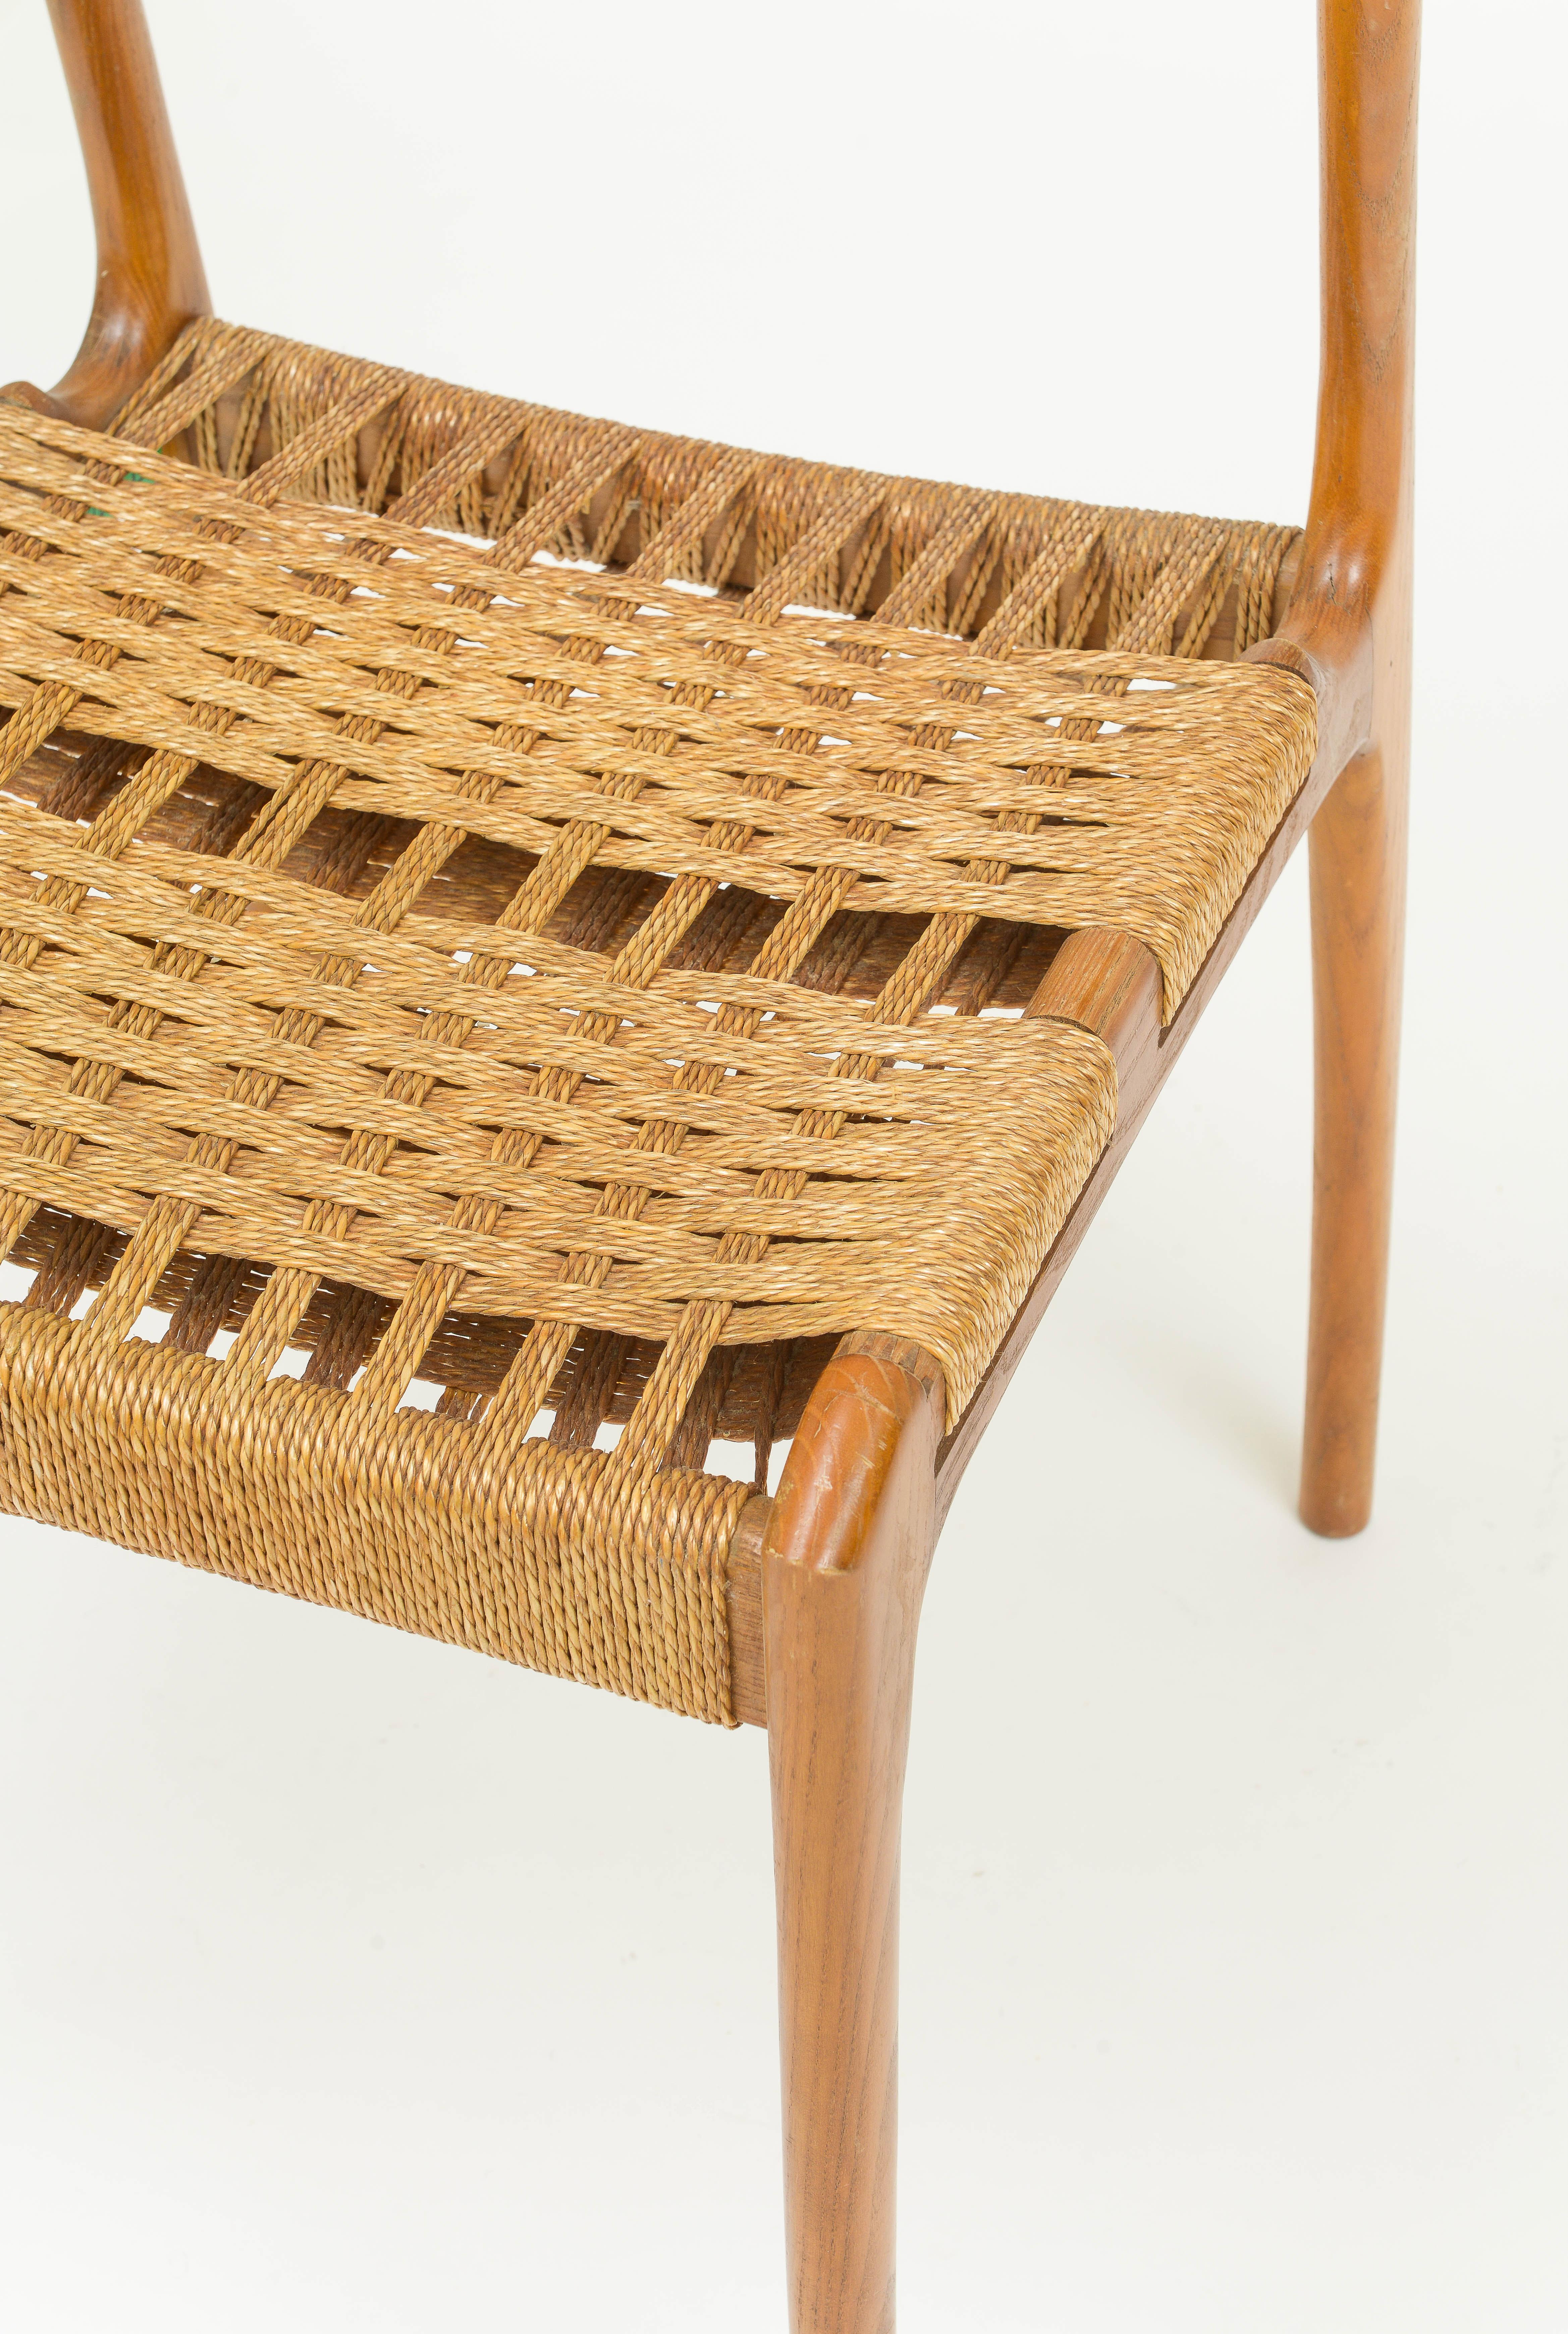 6 Italian Dining Chairs with Woven Rush Seating, 1960's France For Sale 6